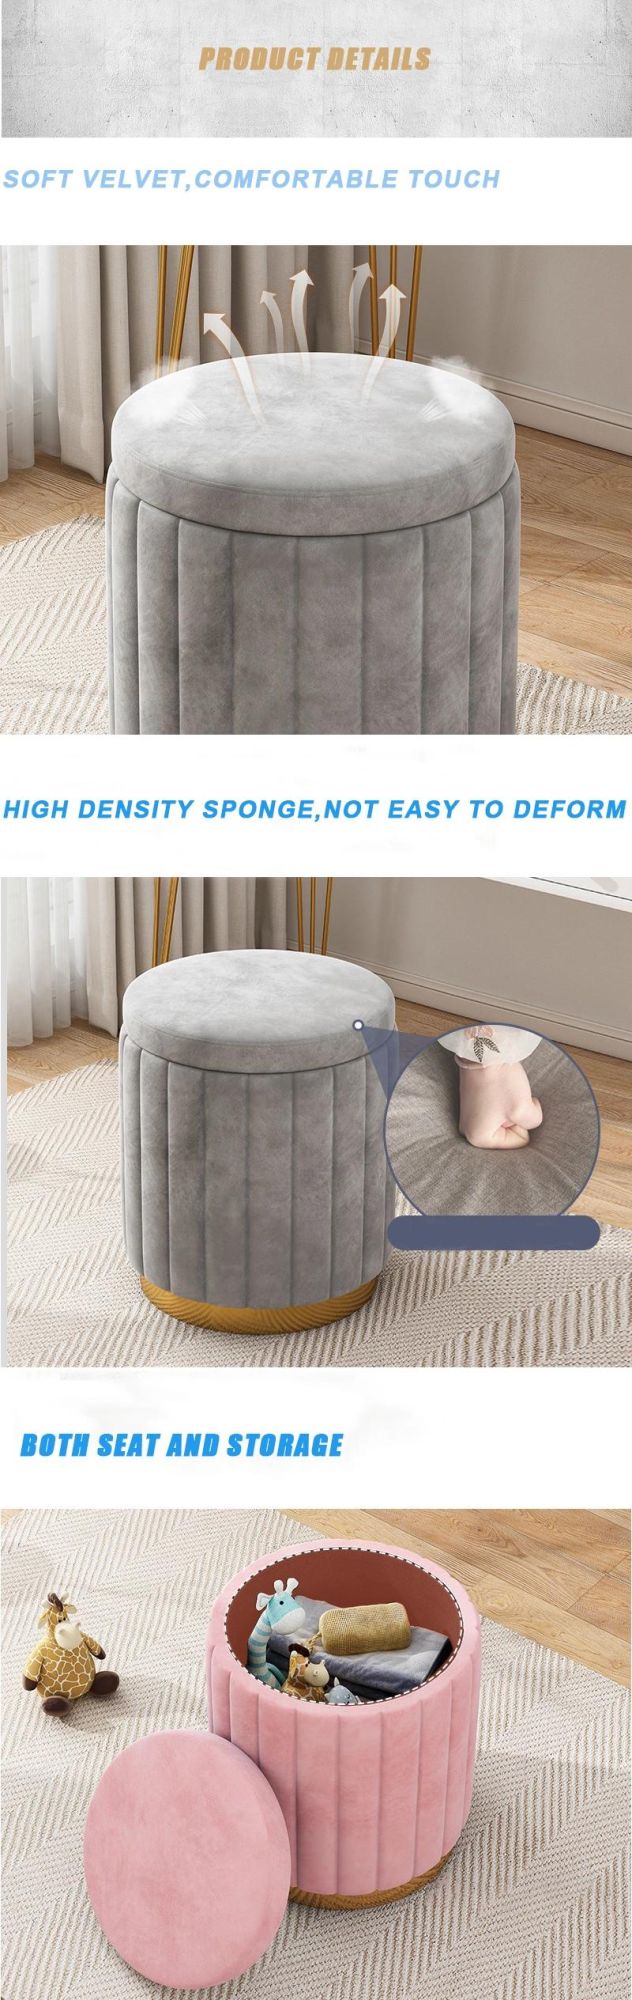 Nordic Doorway Shoe Changing Stool Home Living Room Small Sofa Stool Gray Color Dressing Room Modern Make up Stools